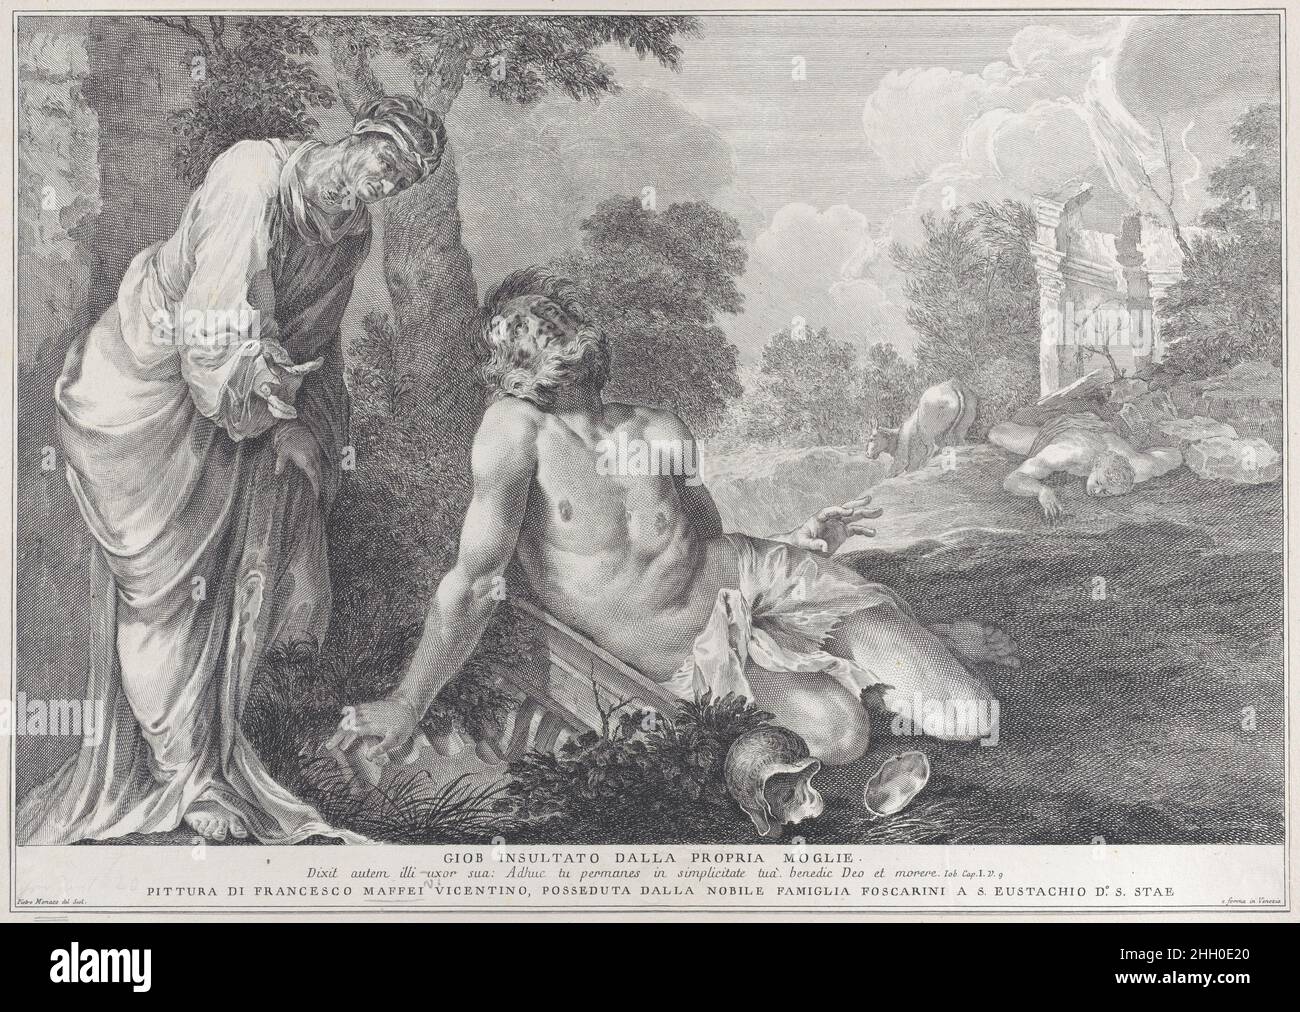 Job rebuked by his wife 1730–39 Pietro Monaco. Job rebuked by his wife. After Francesco Maffei (Italian, Vicenza 1605–1660 Padua). 1730–39. Etching and engraving. Prints Stock Photo